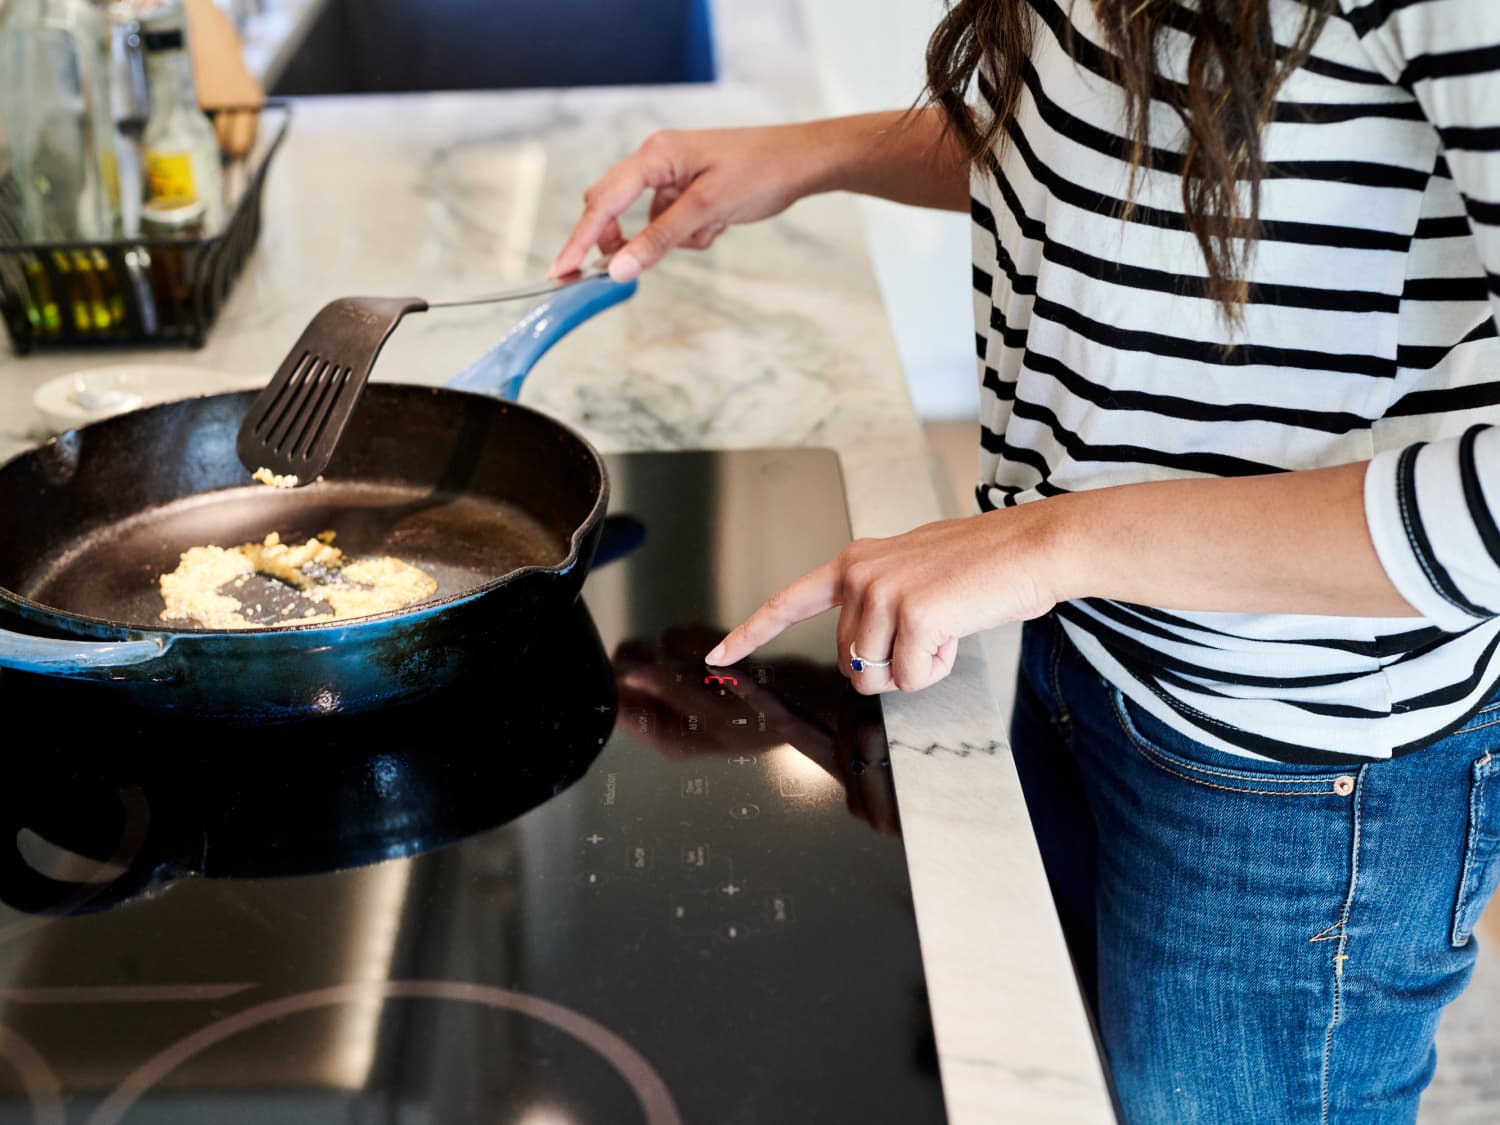 s best nonstick frying pan has 30,000 5-star reviews for just $14